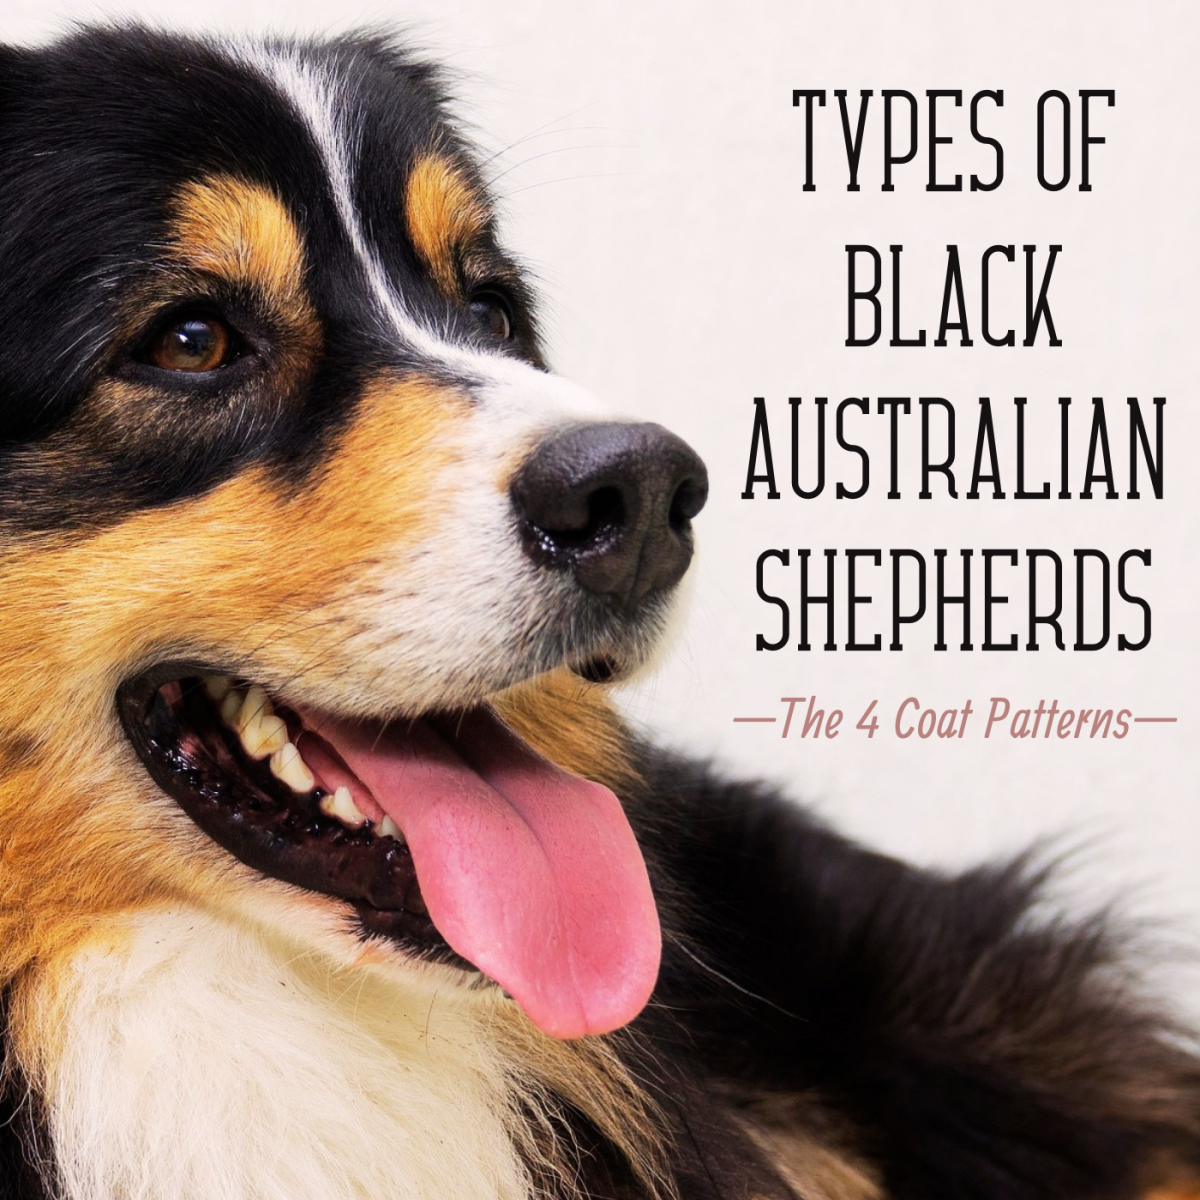 Learn about the four coat patterns for black Australian Shepherd dogs and how to identify them, like this gorgeous black tricolor Aussie!